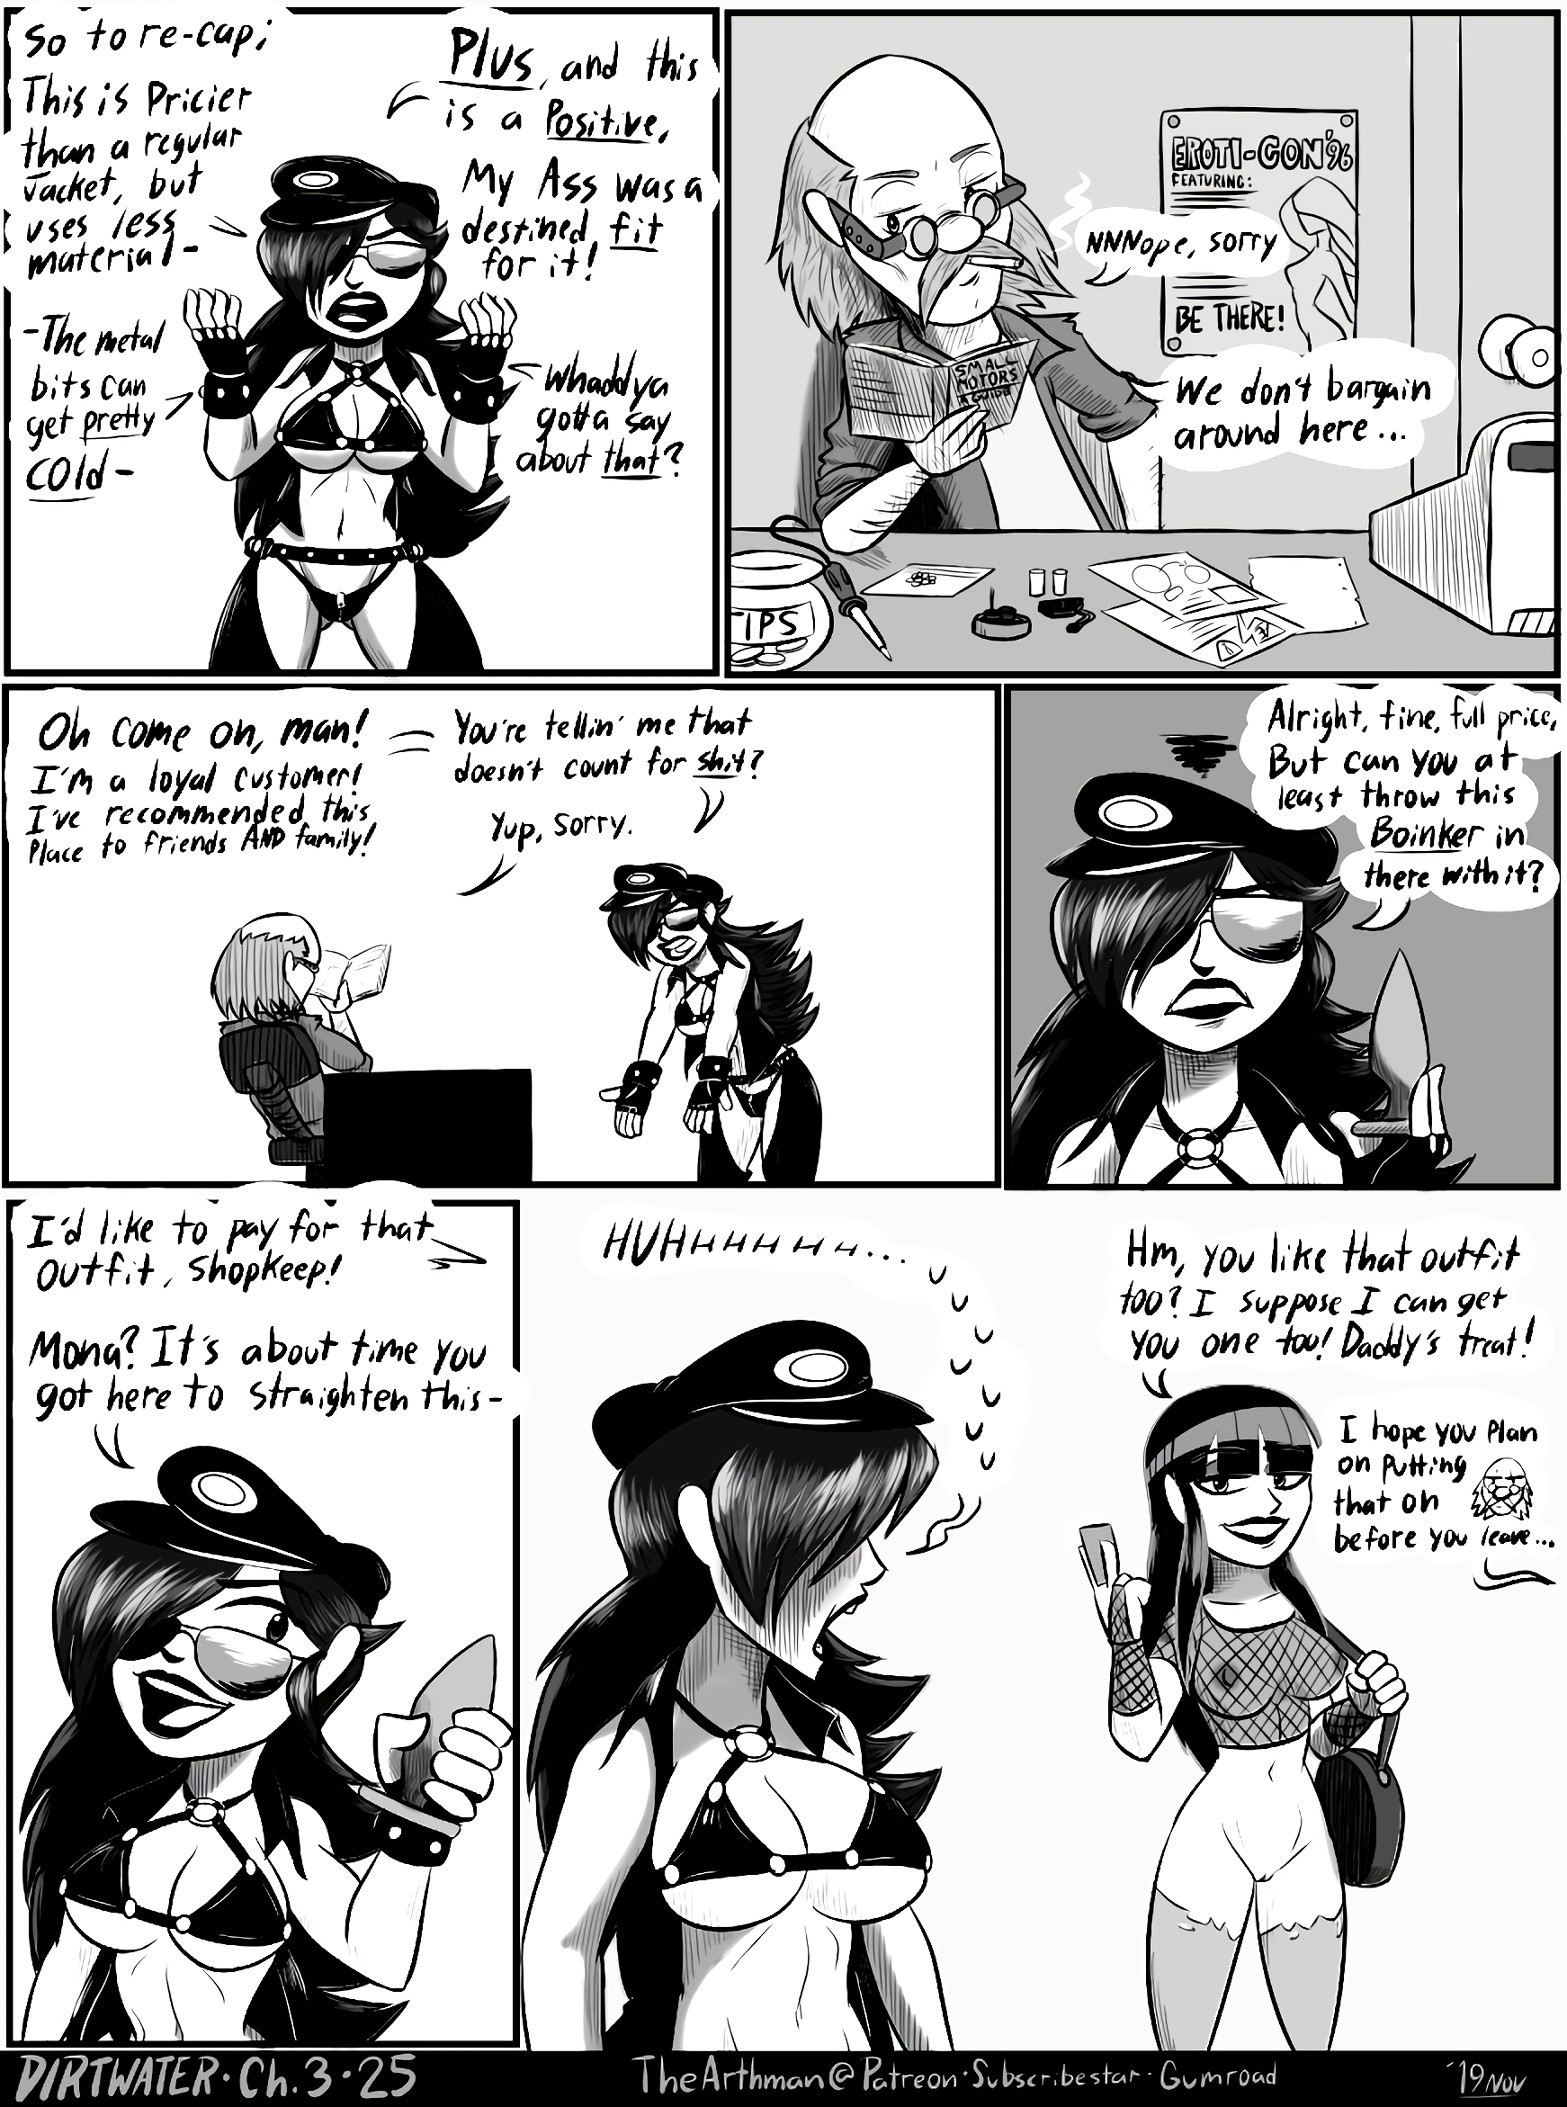 Dirtwater 3 - Dark Chambers porn comic picture 26